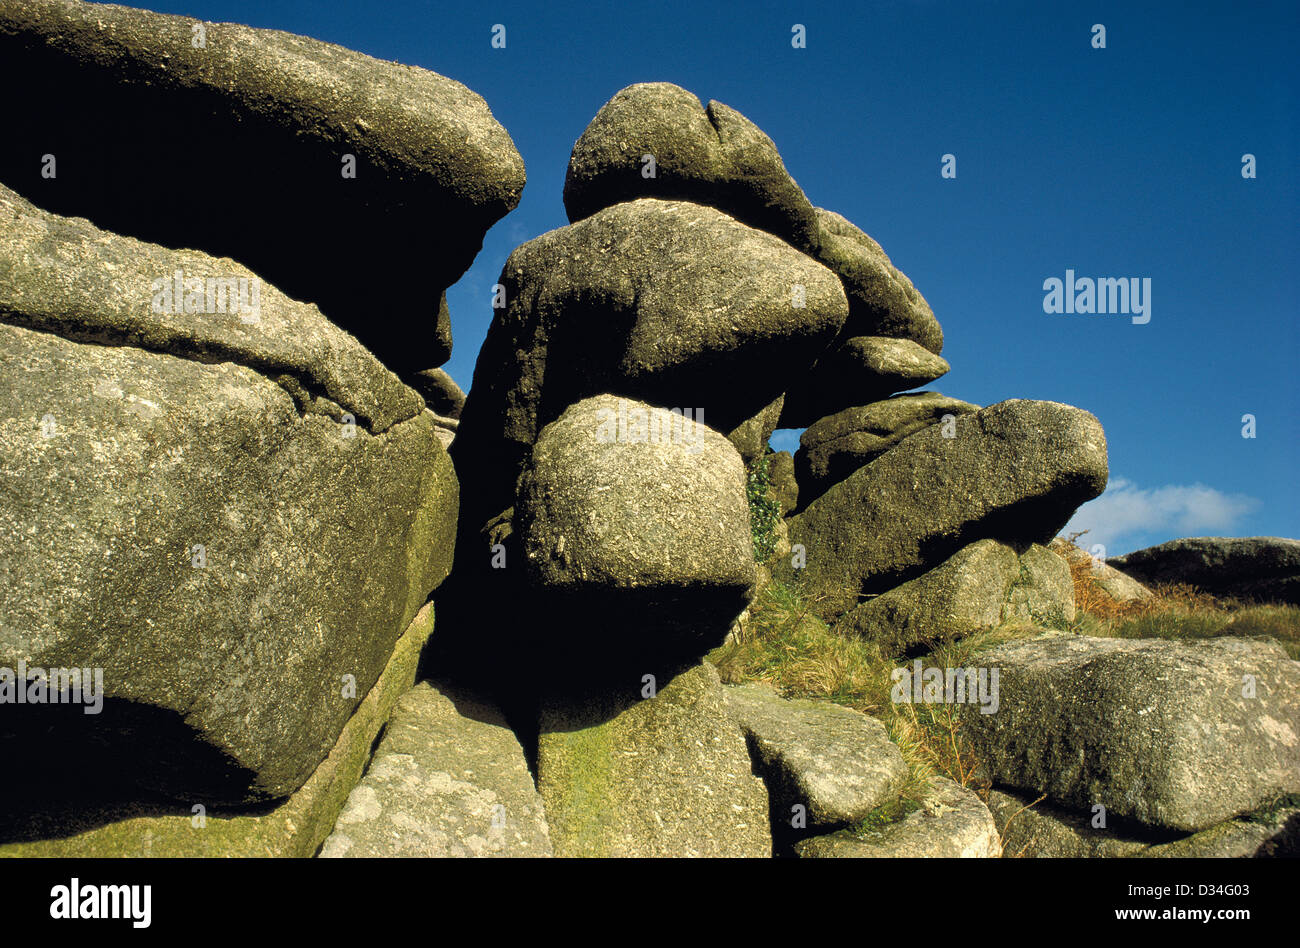 Granite outcrop, Penwith moors, Zennor, West Cornwall, England, UK Stock Photo